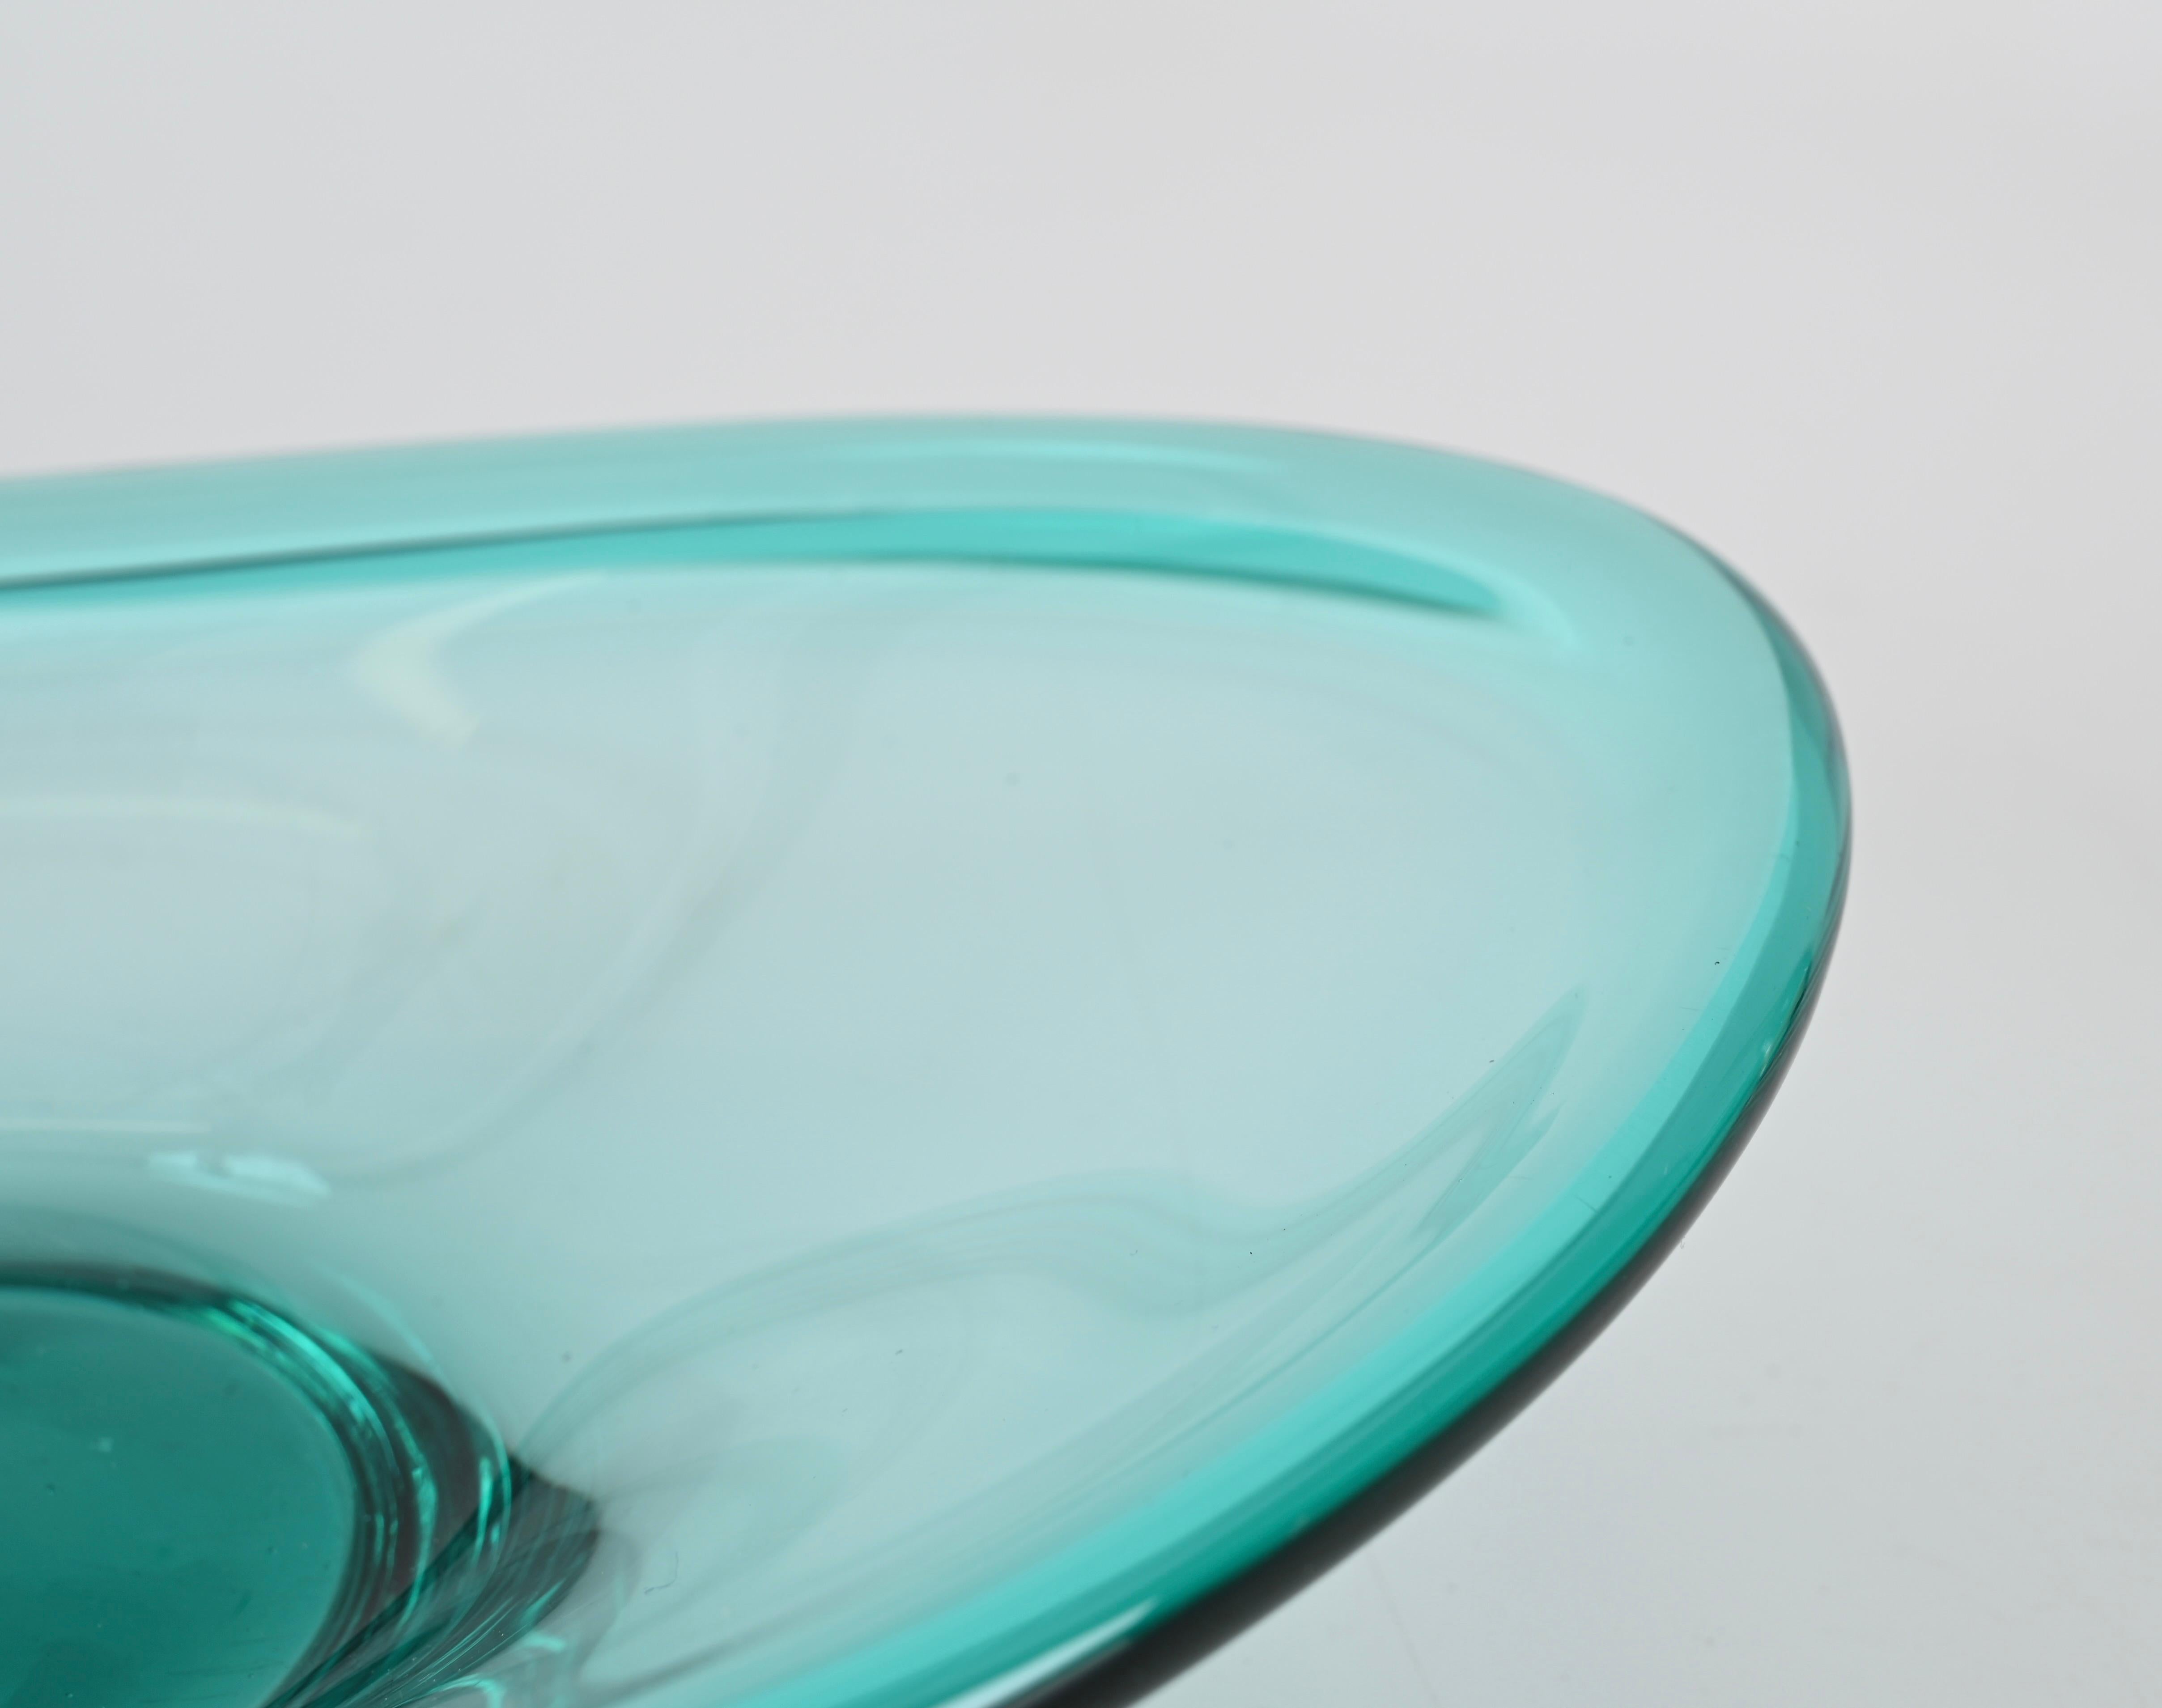 Tiffany Blue Murano Glass Bowl or Pocket Emptier, Italy, 1960s For Sale 3